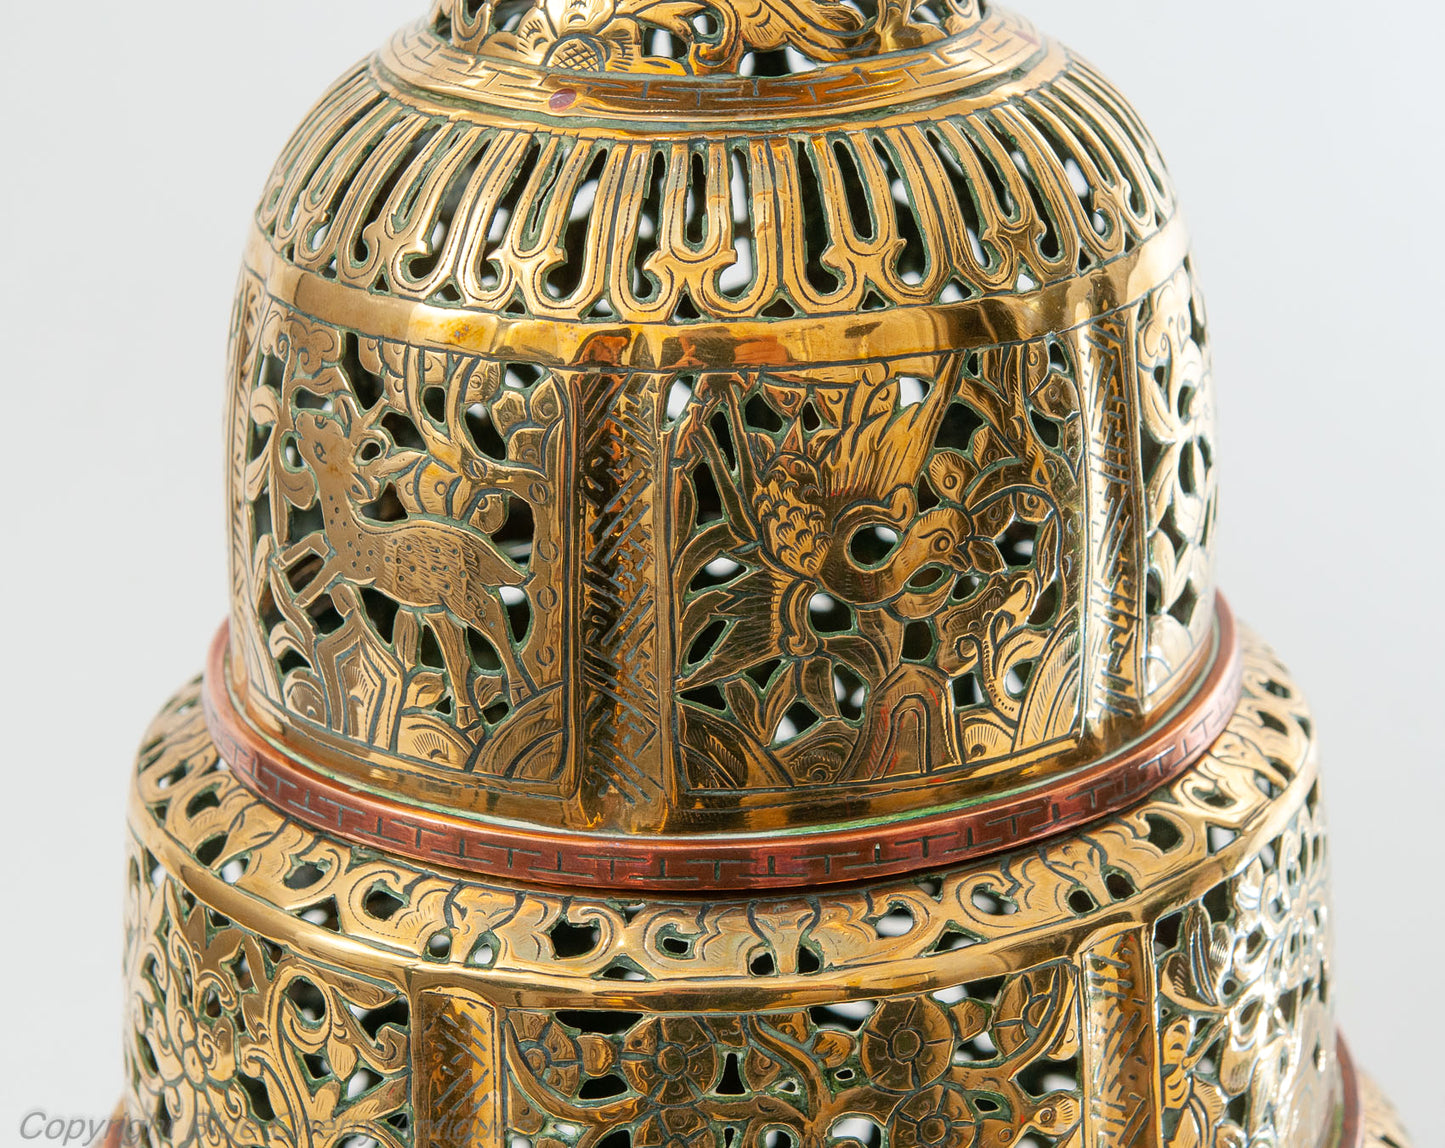 Antique Large Middle Eastern Pierced and Chased Brass Tiered Incense Burner (Code 1837)